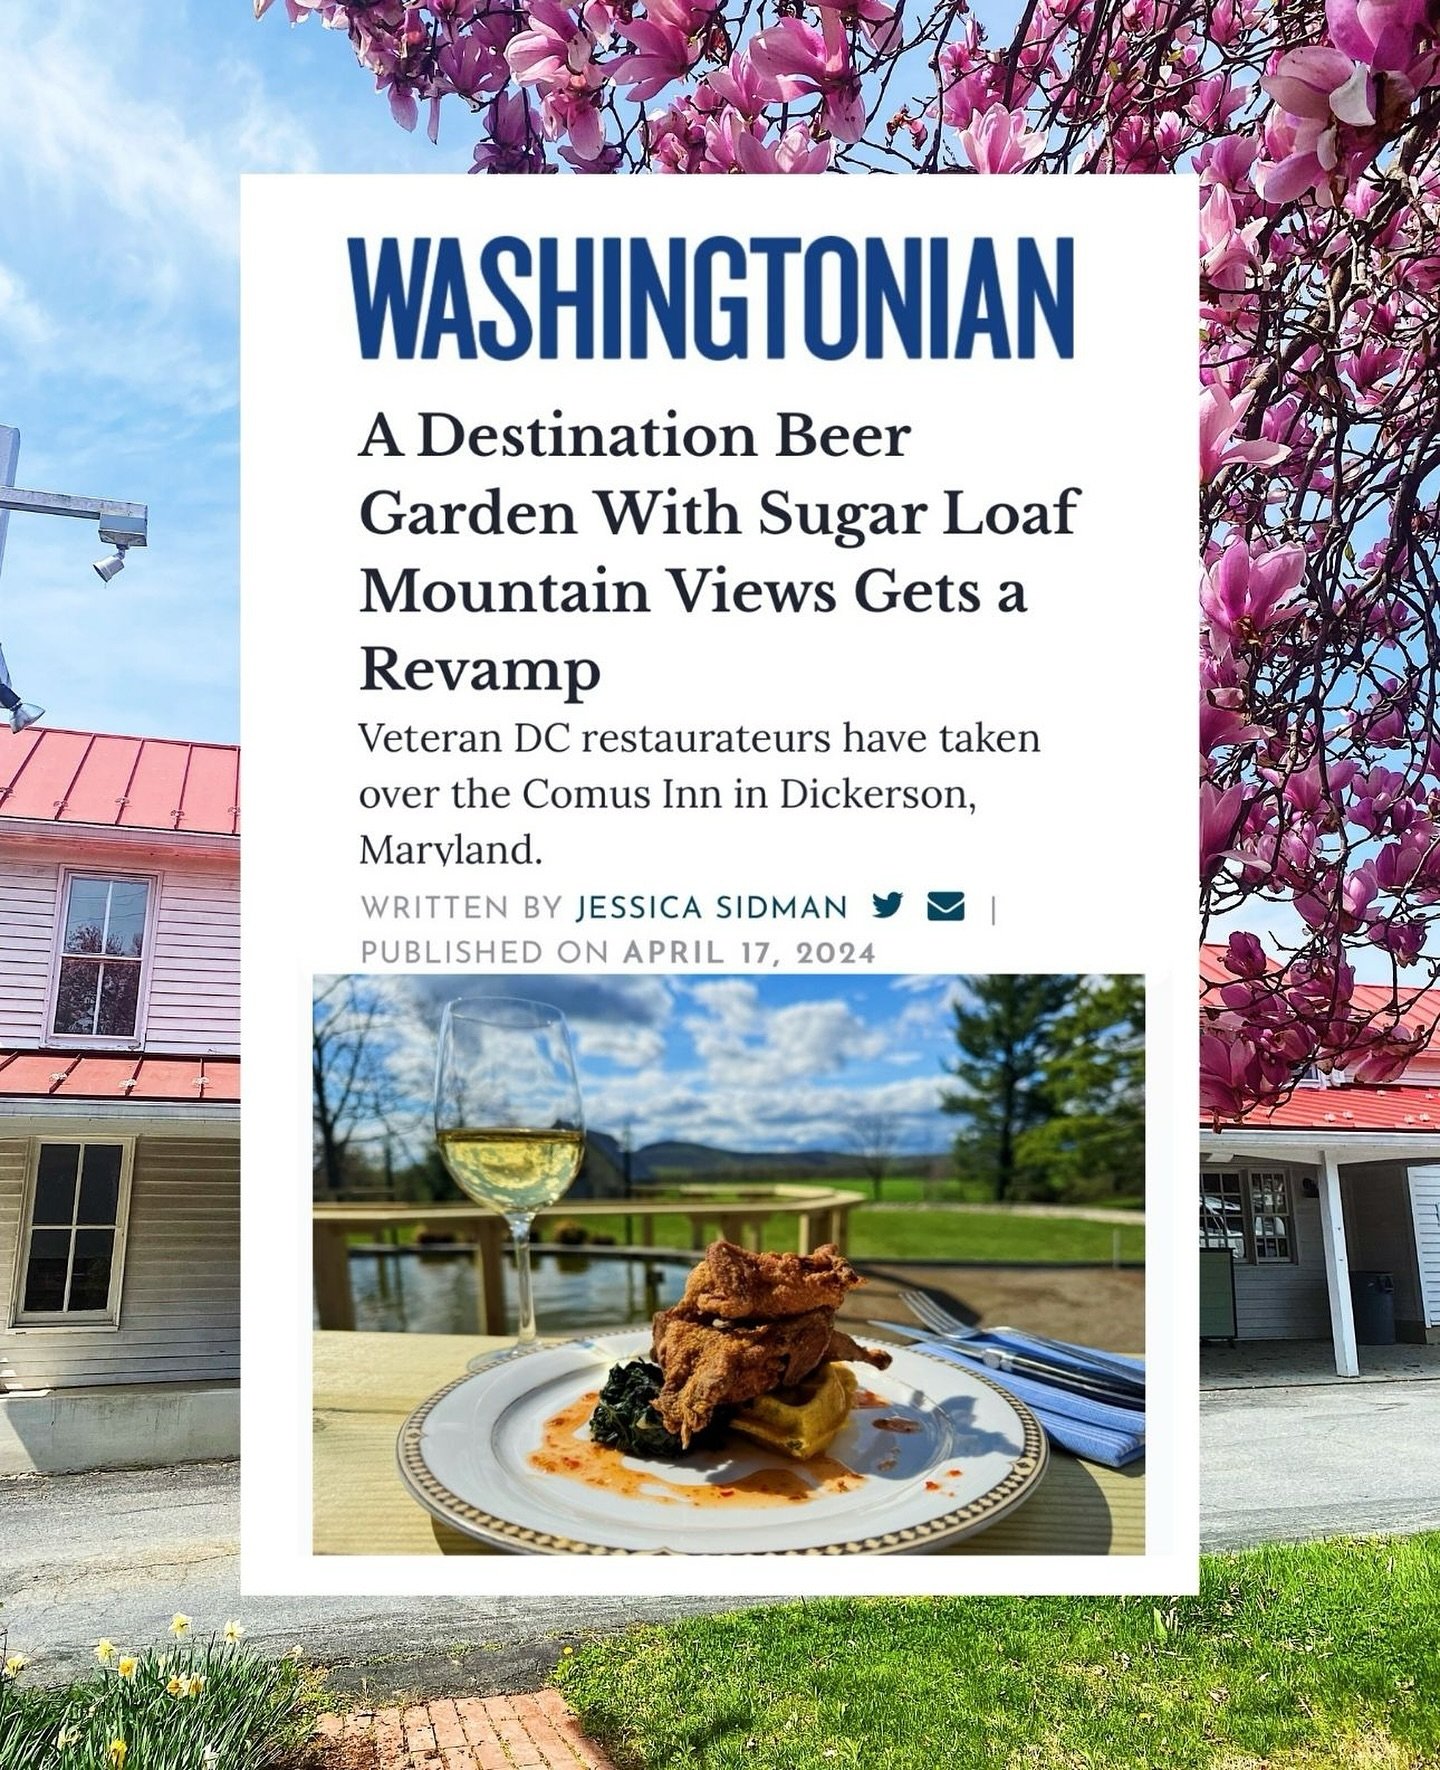 Much love to @jsidman &amp; @washingtonianmag for the lovely article. We&rsquo;re so thrilled to be back and part of this community.
What a beautiful weekend kick to off our re-opening 💕
Come say hi!
Reservations are available on @opentable, but wal